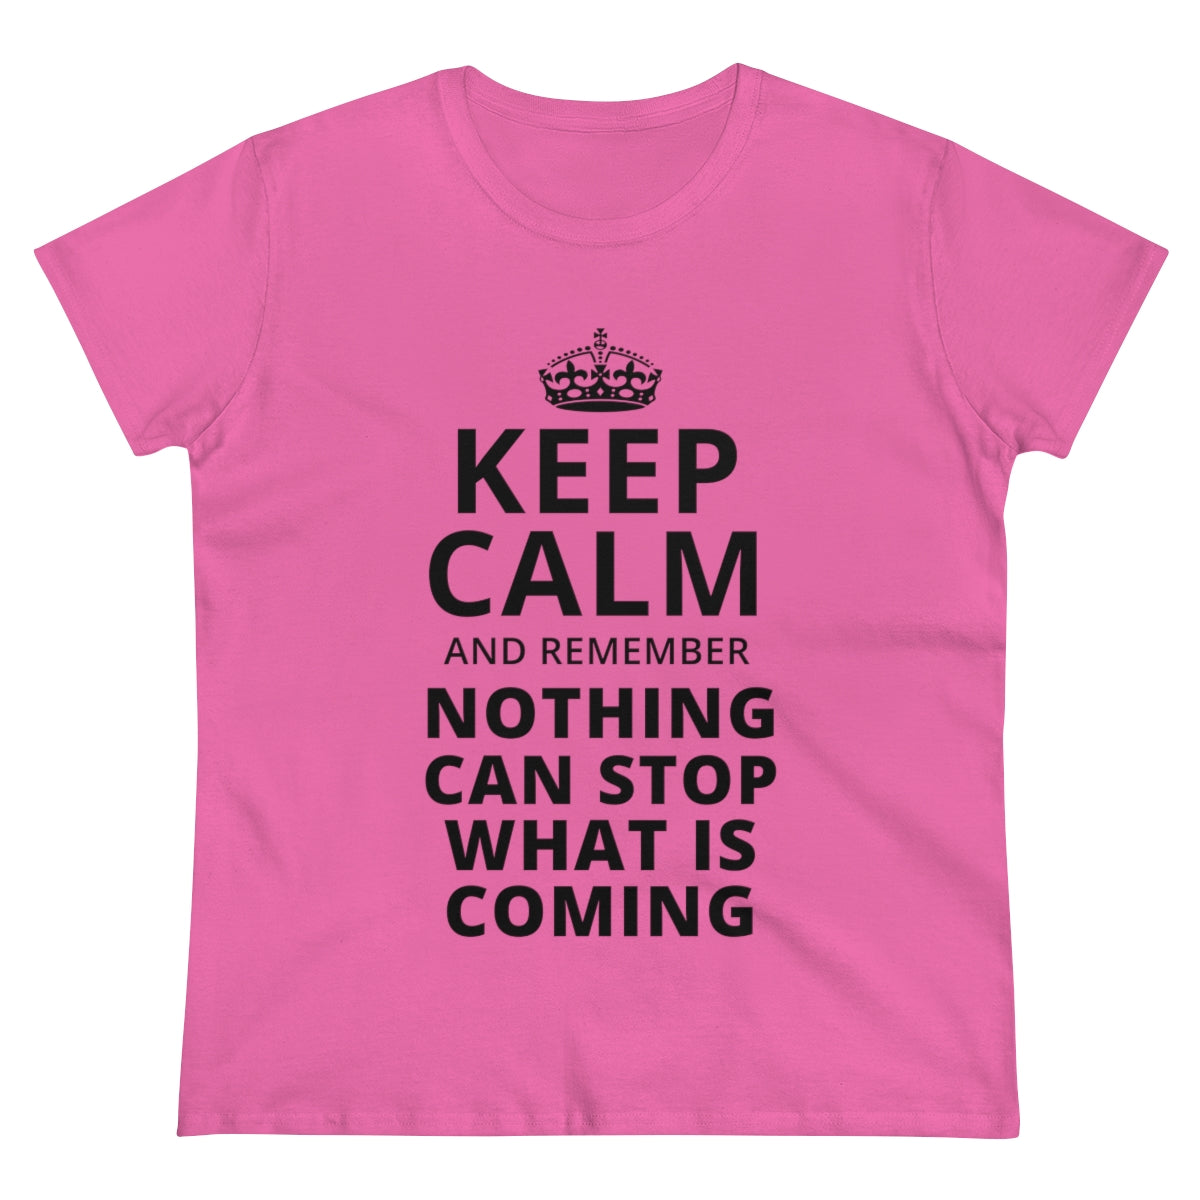 Keep Calm And Remember... | Women's Tee - Rise of The New Media